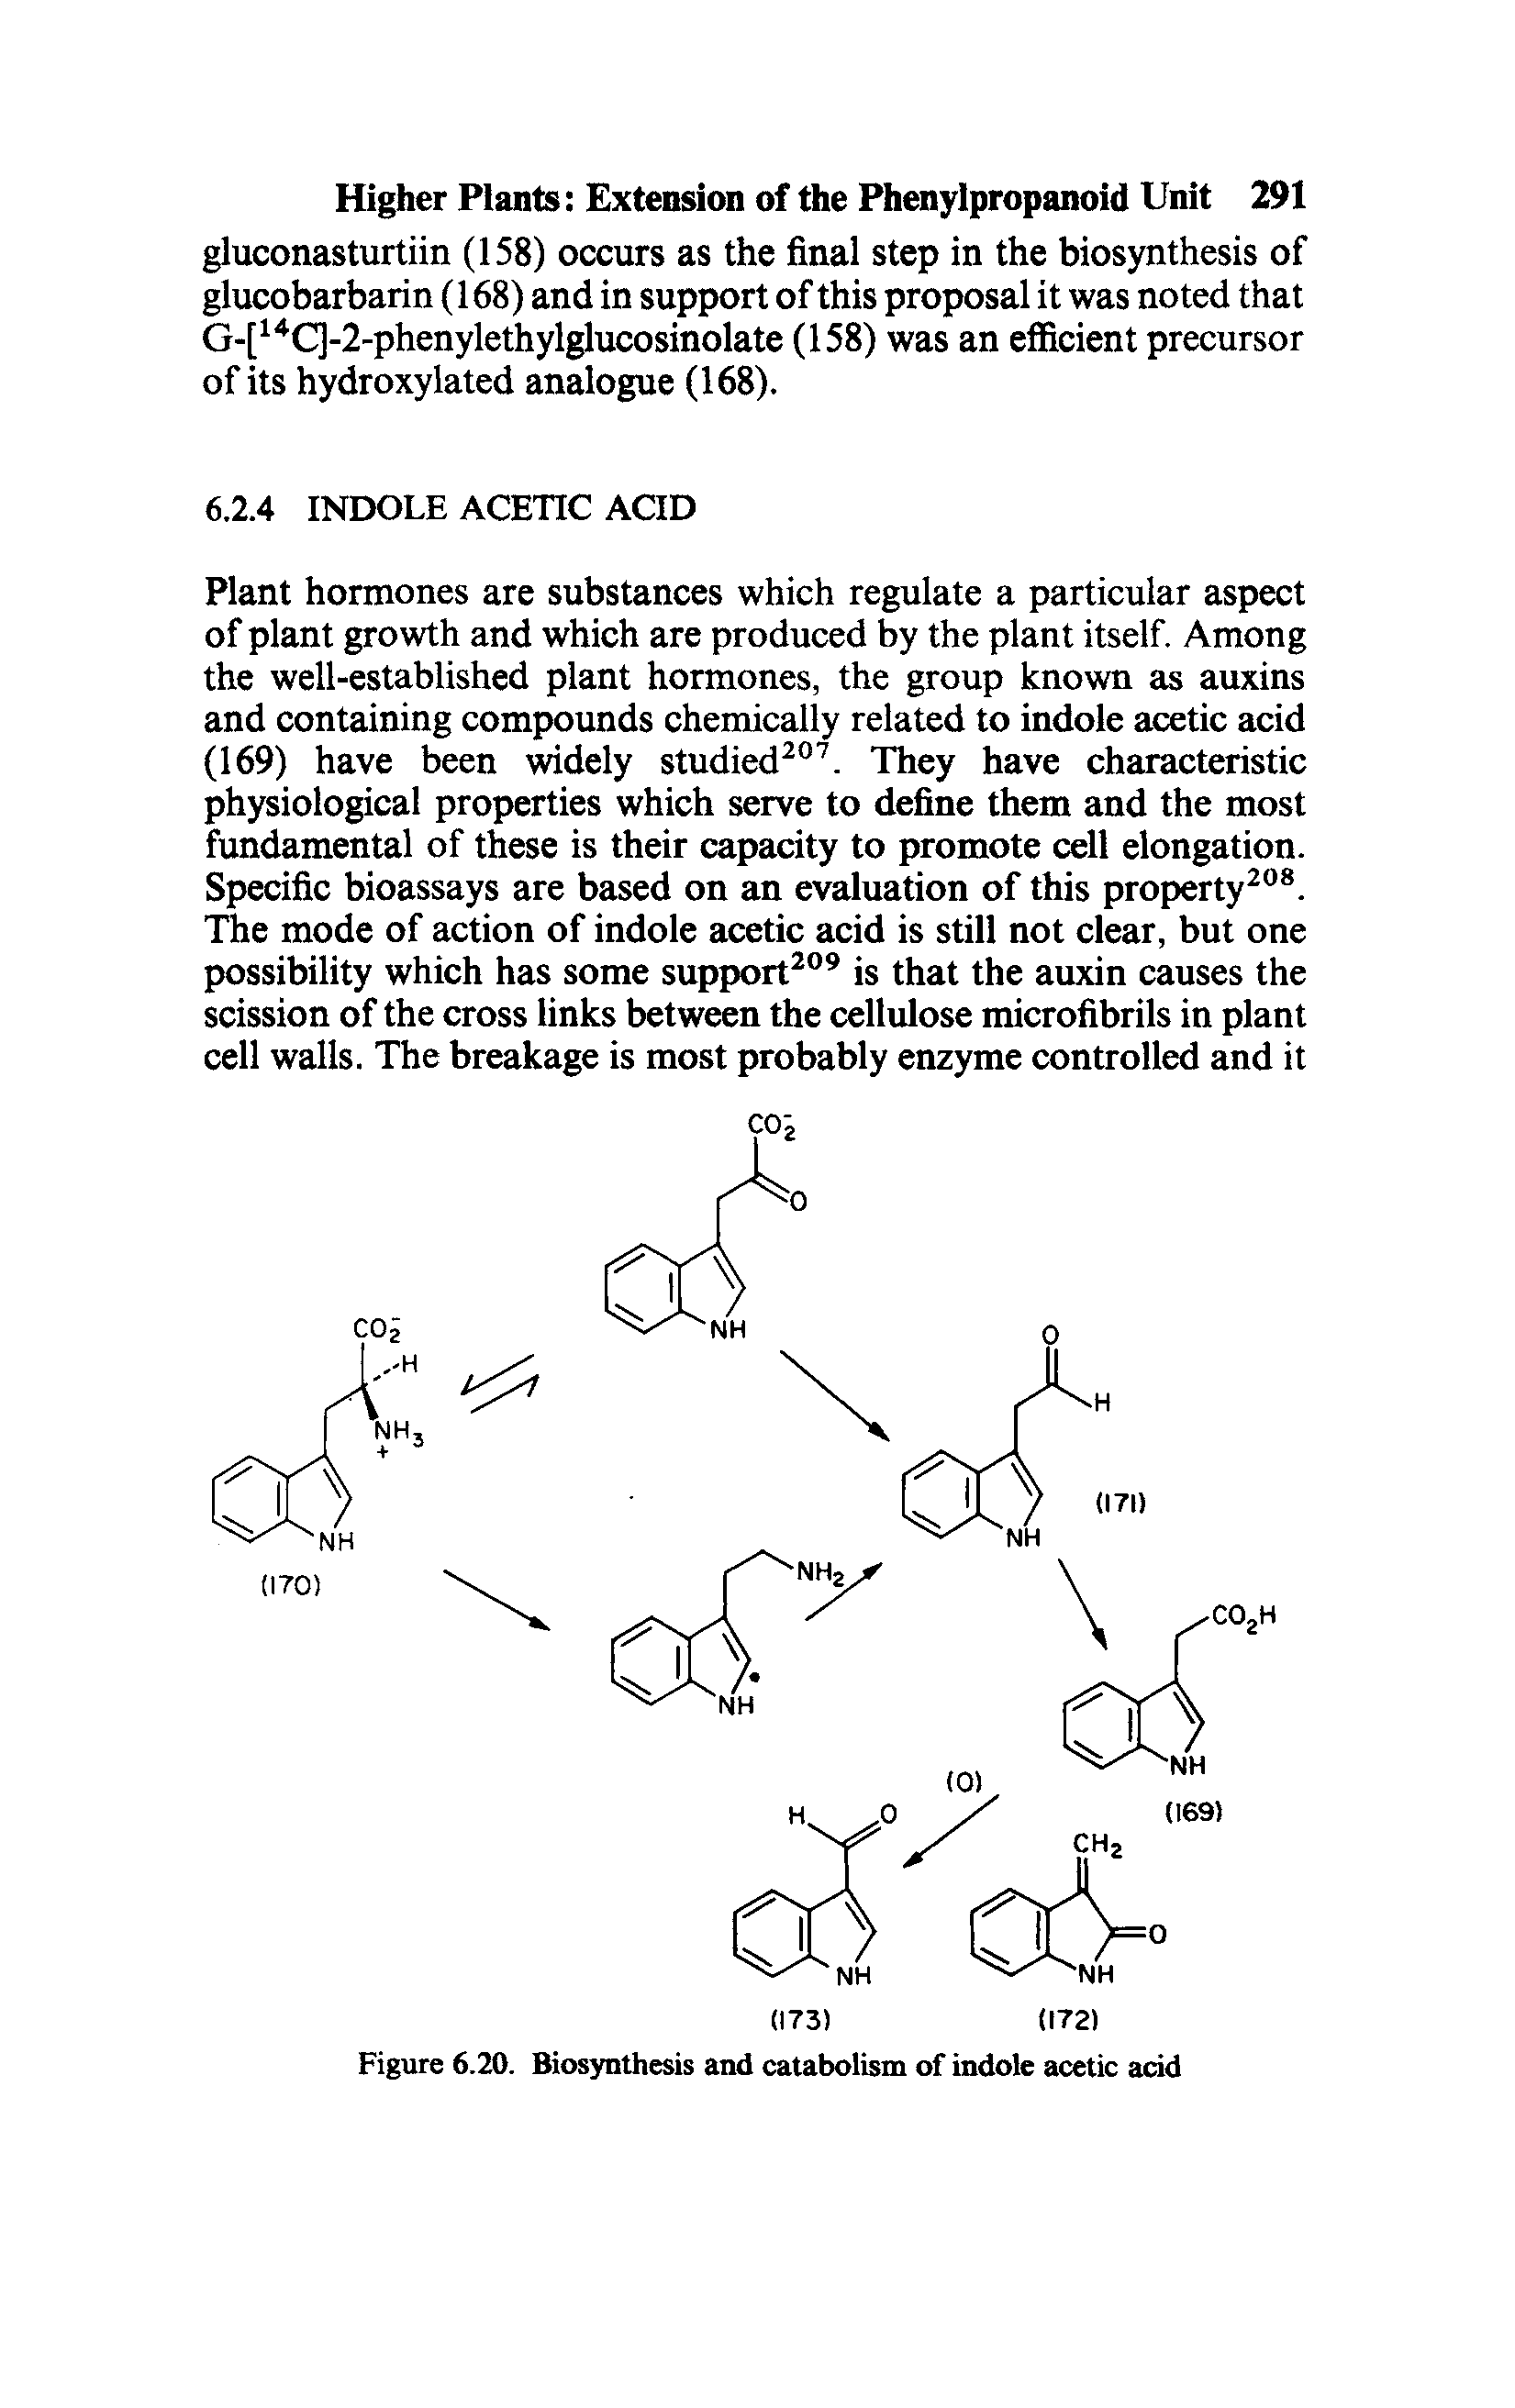 Figure 6.20. Biosynthesis and catabolism of indole acetic acid...